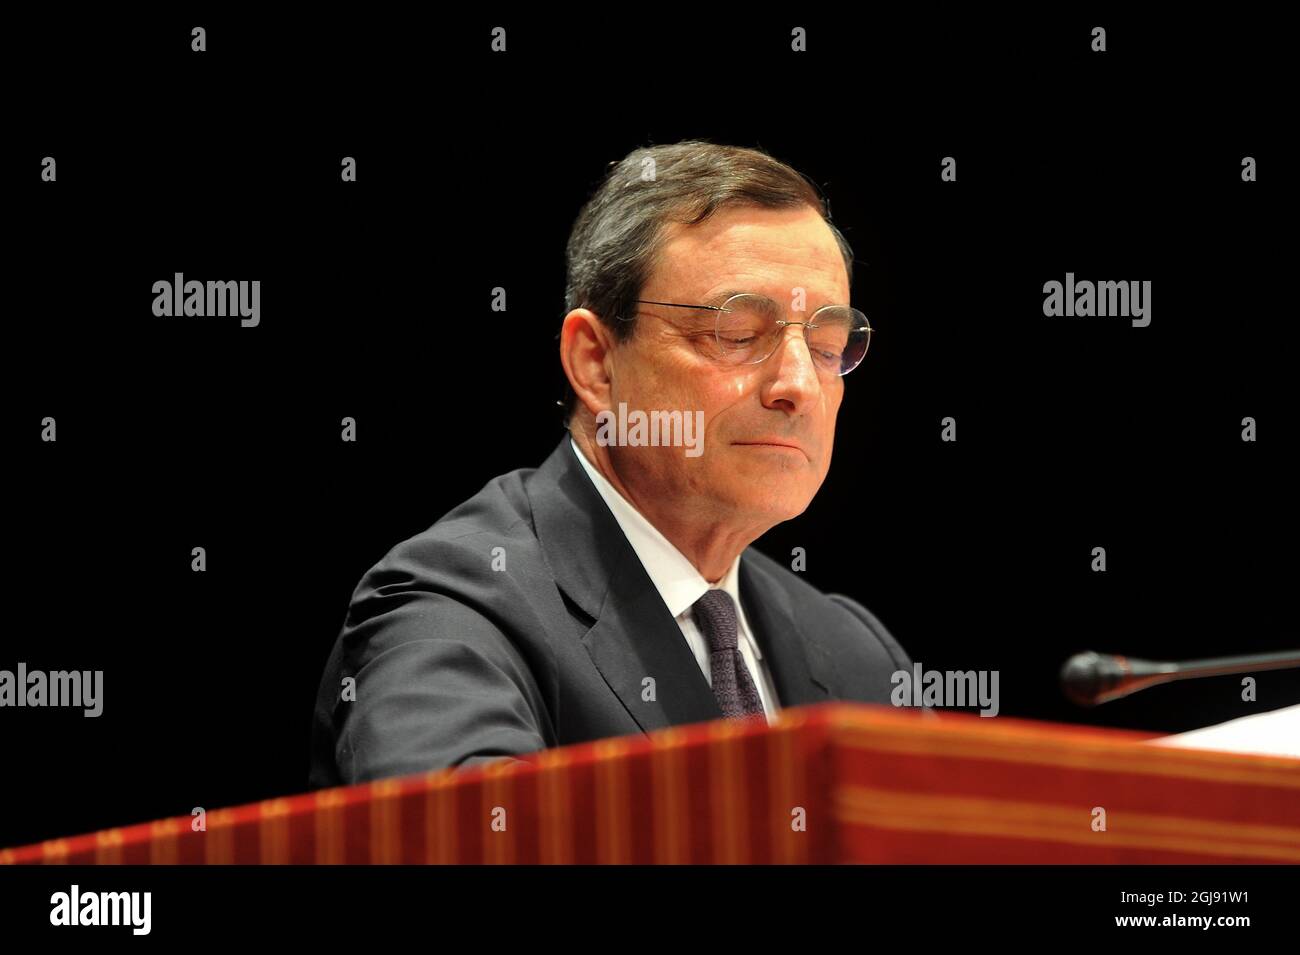 ROME, ITALY - Apr 13, 2011: The Italian Prime Minister Mario Draghi during the press conference. Rome, Italy. Stock Photo